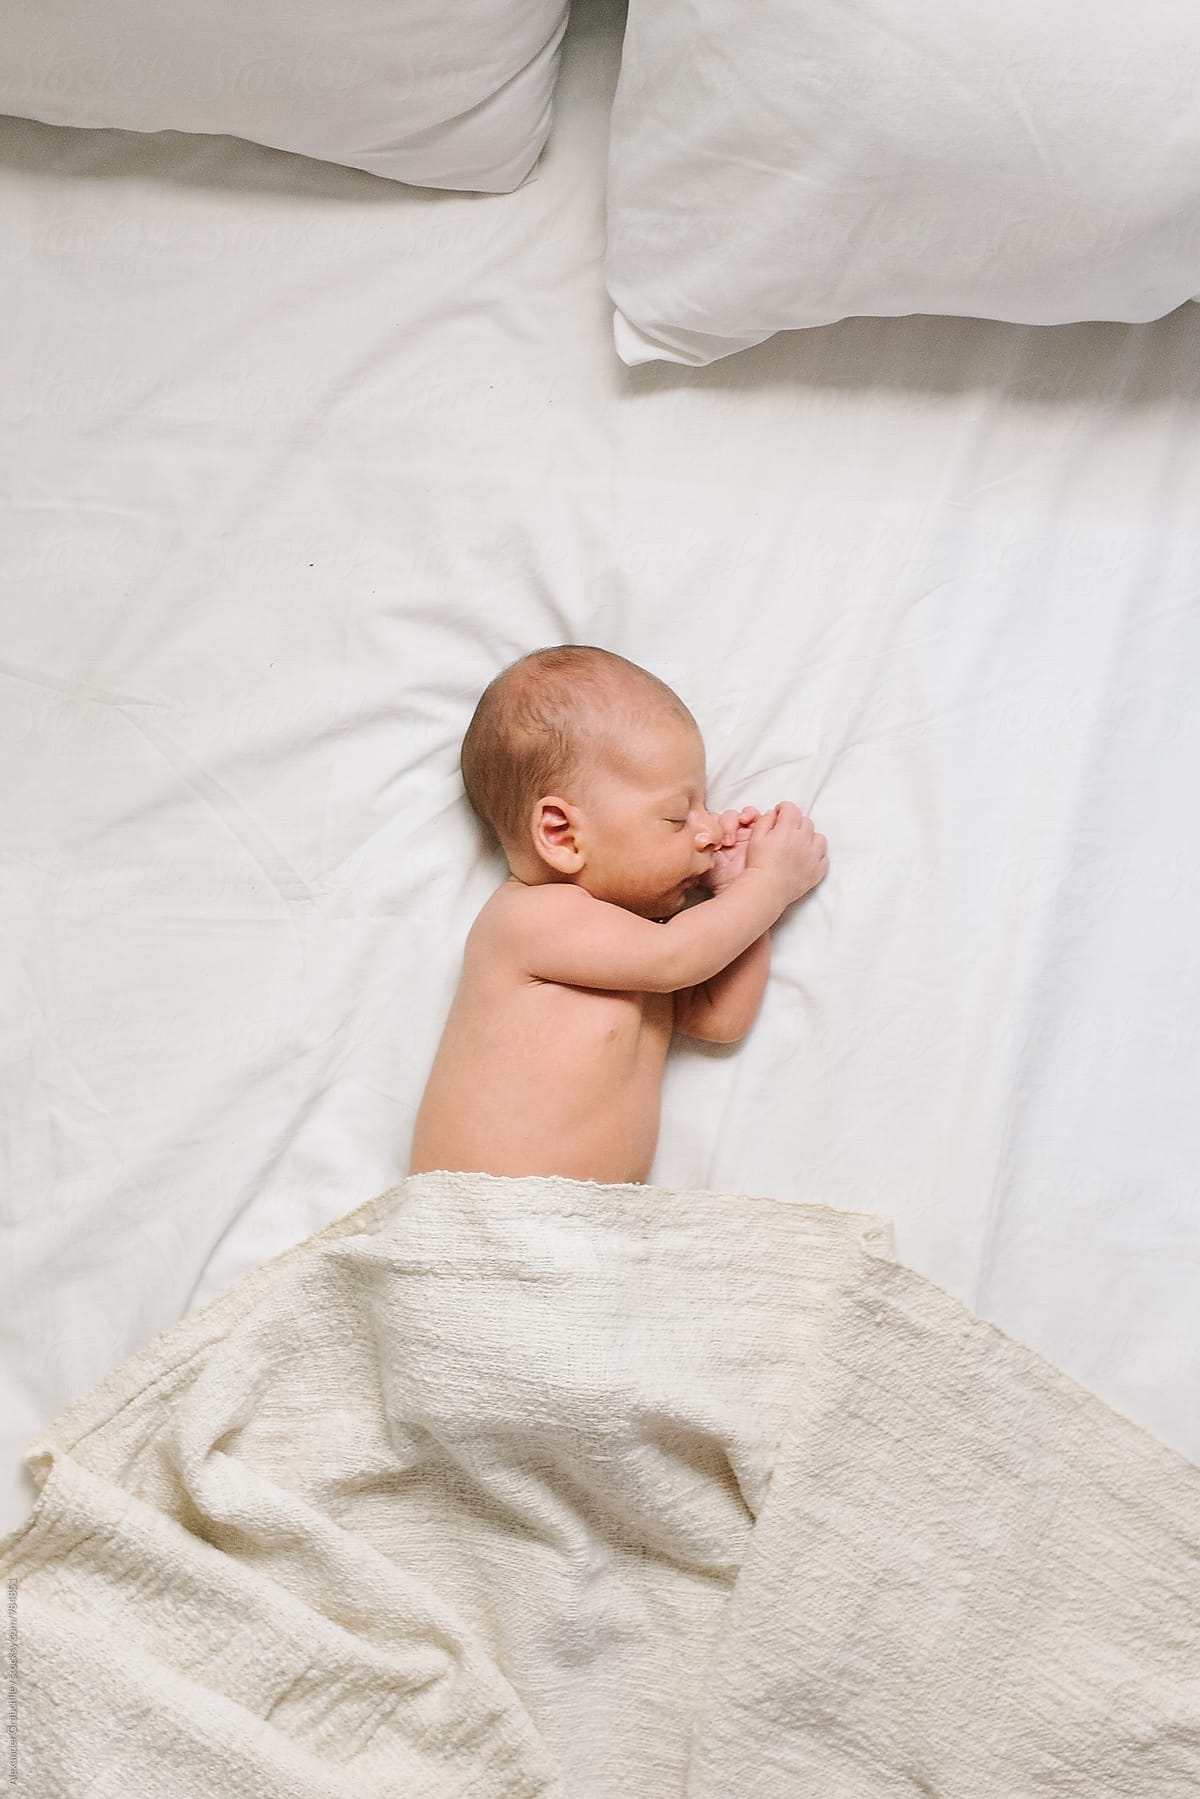 Baby Sleeping Alone In A Bed By Stocksy Contributor Alexander